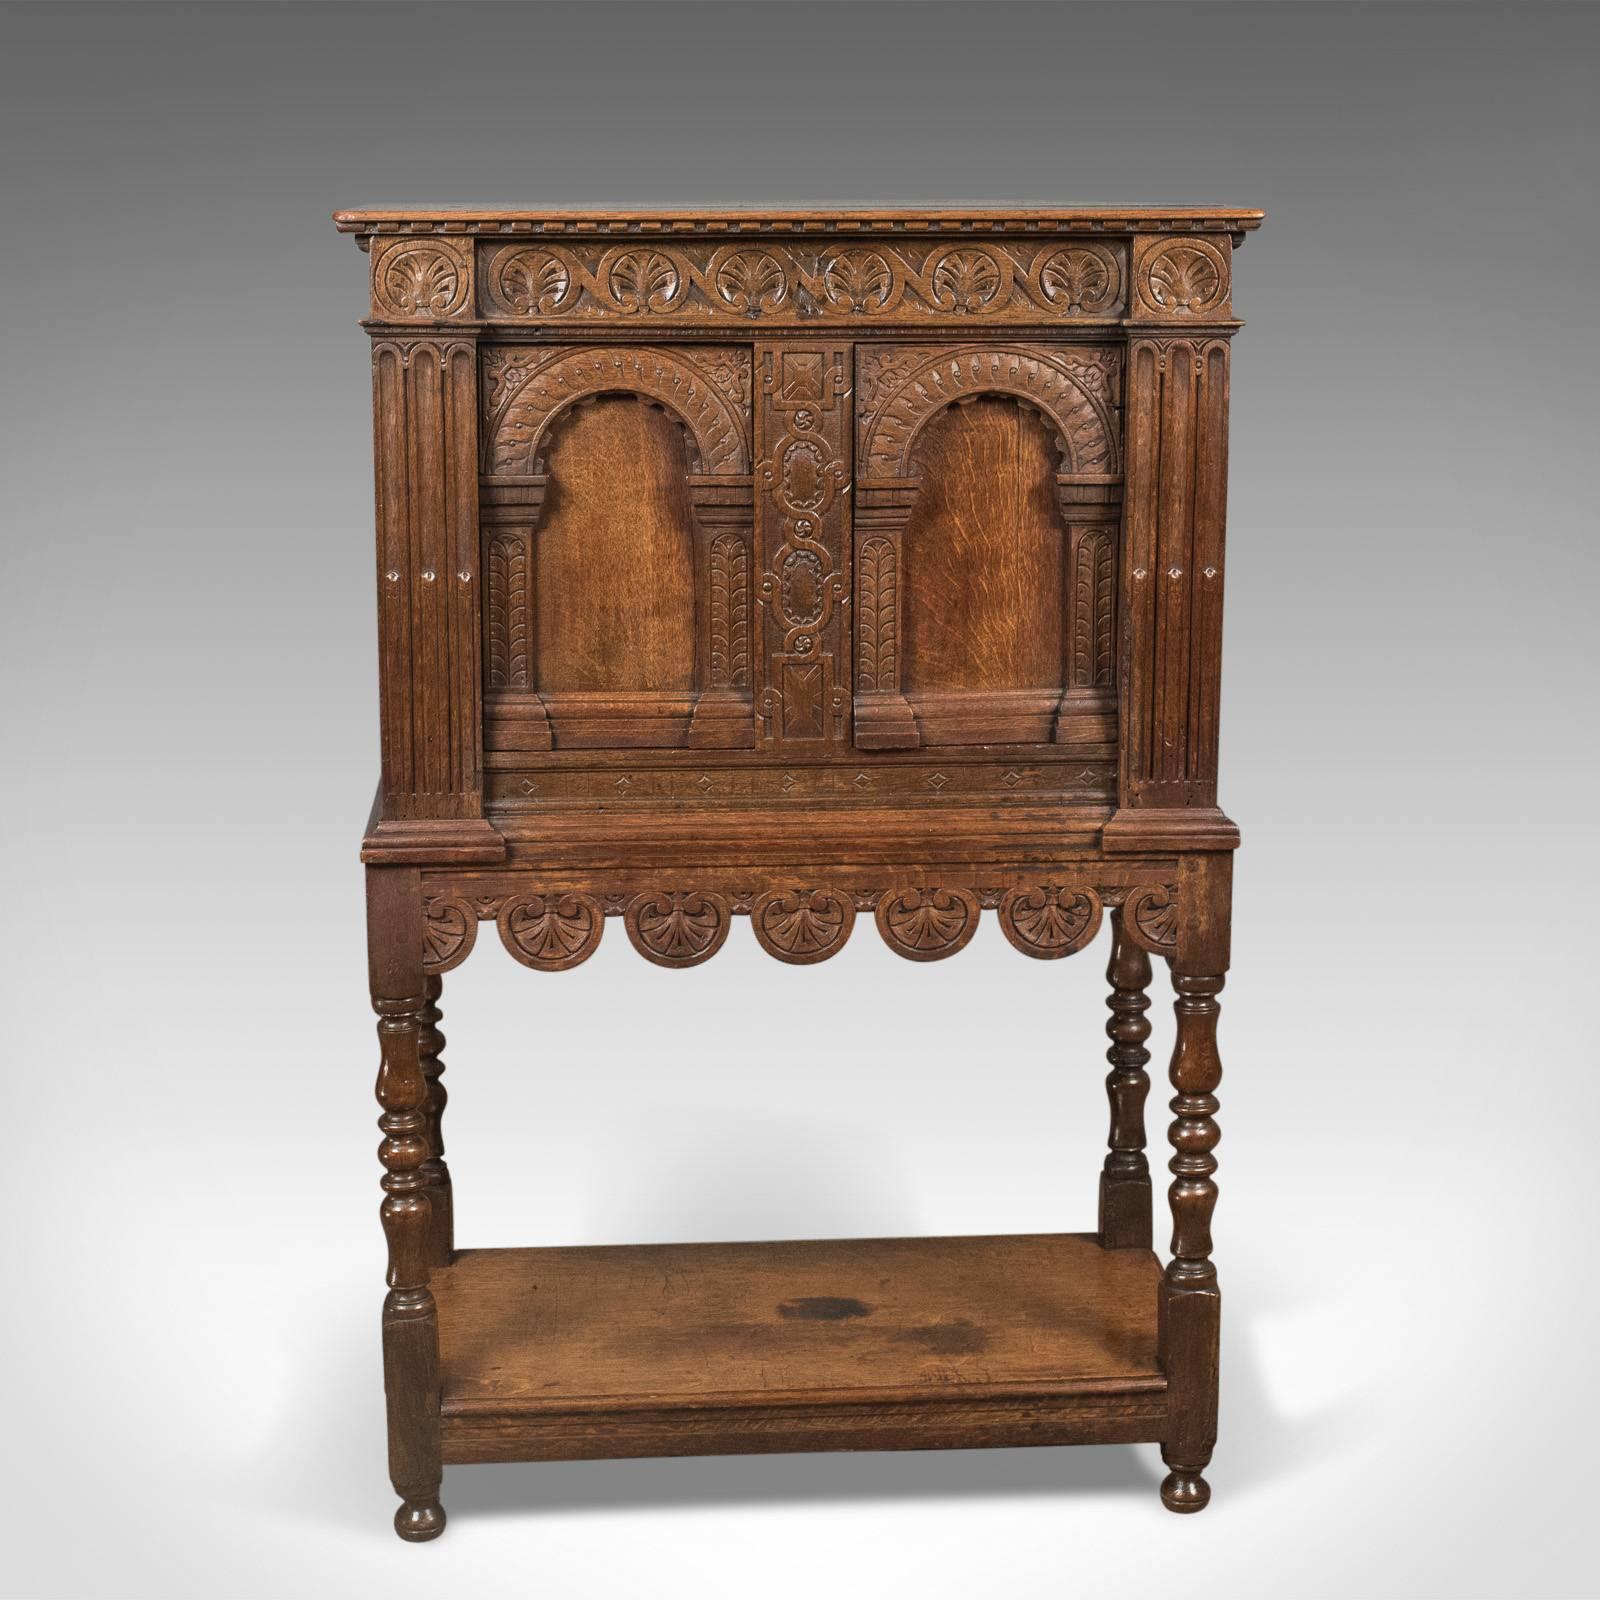 This is a Victorian antique livery cupboard in the 17th century taste, English oak, circa 1880.

Warm hues and grain interest in the English oak
Richly decorated with carved detail
Raised on turned legs united by lower display tier

Planked